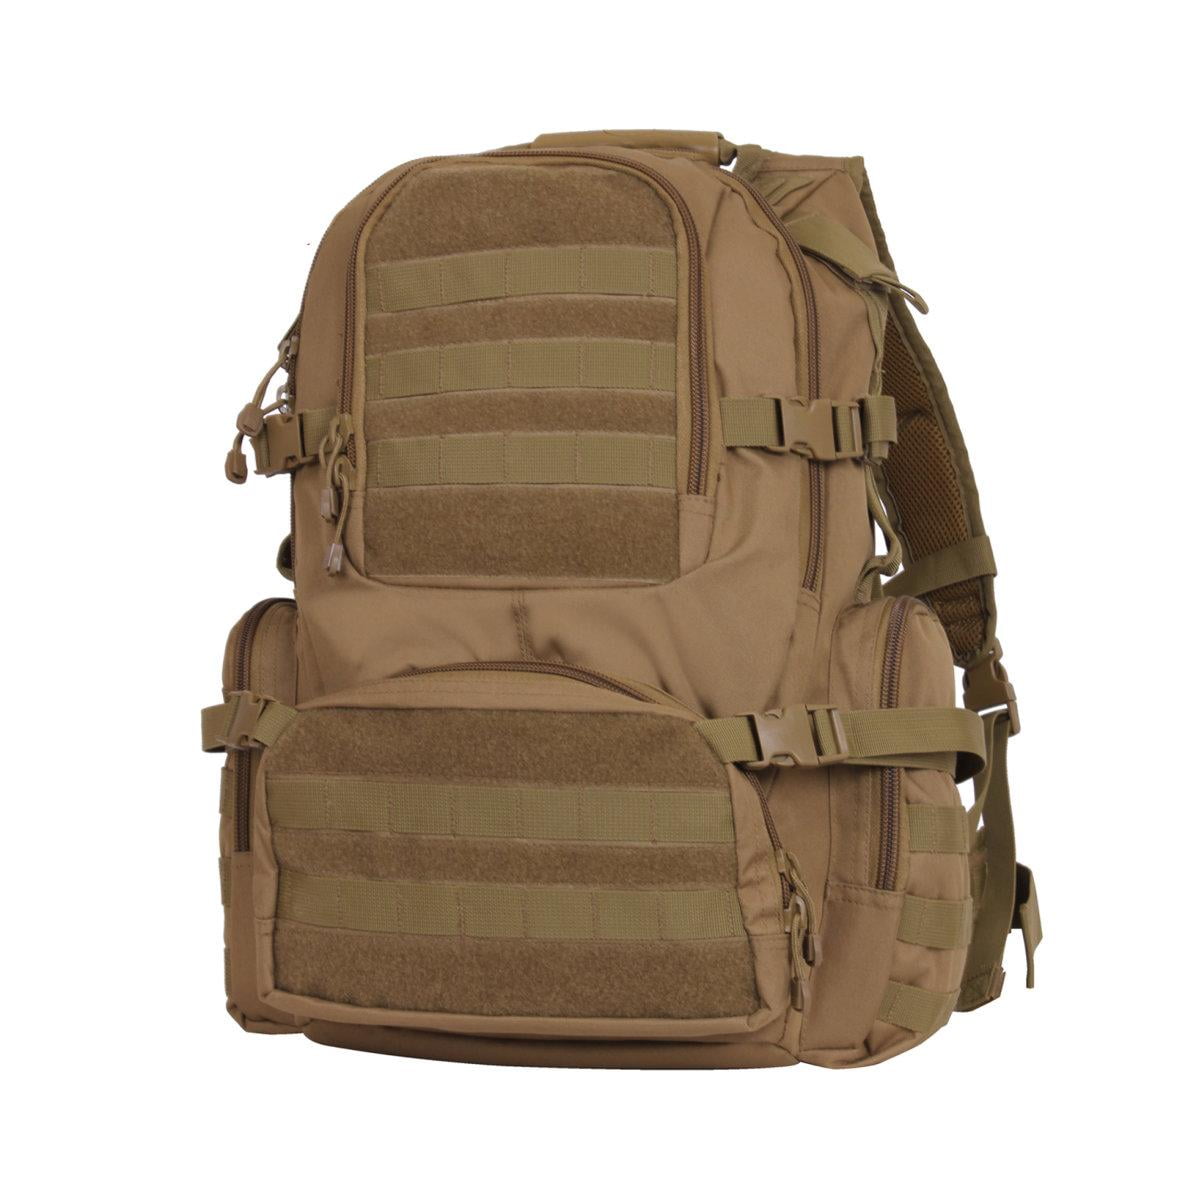 Rothco Global Assault Pack Coyote Brown 23520 for sale online 